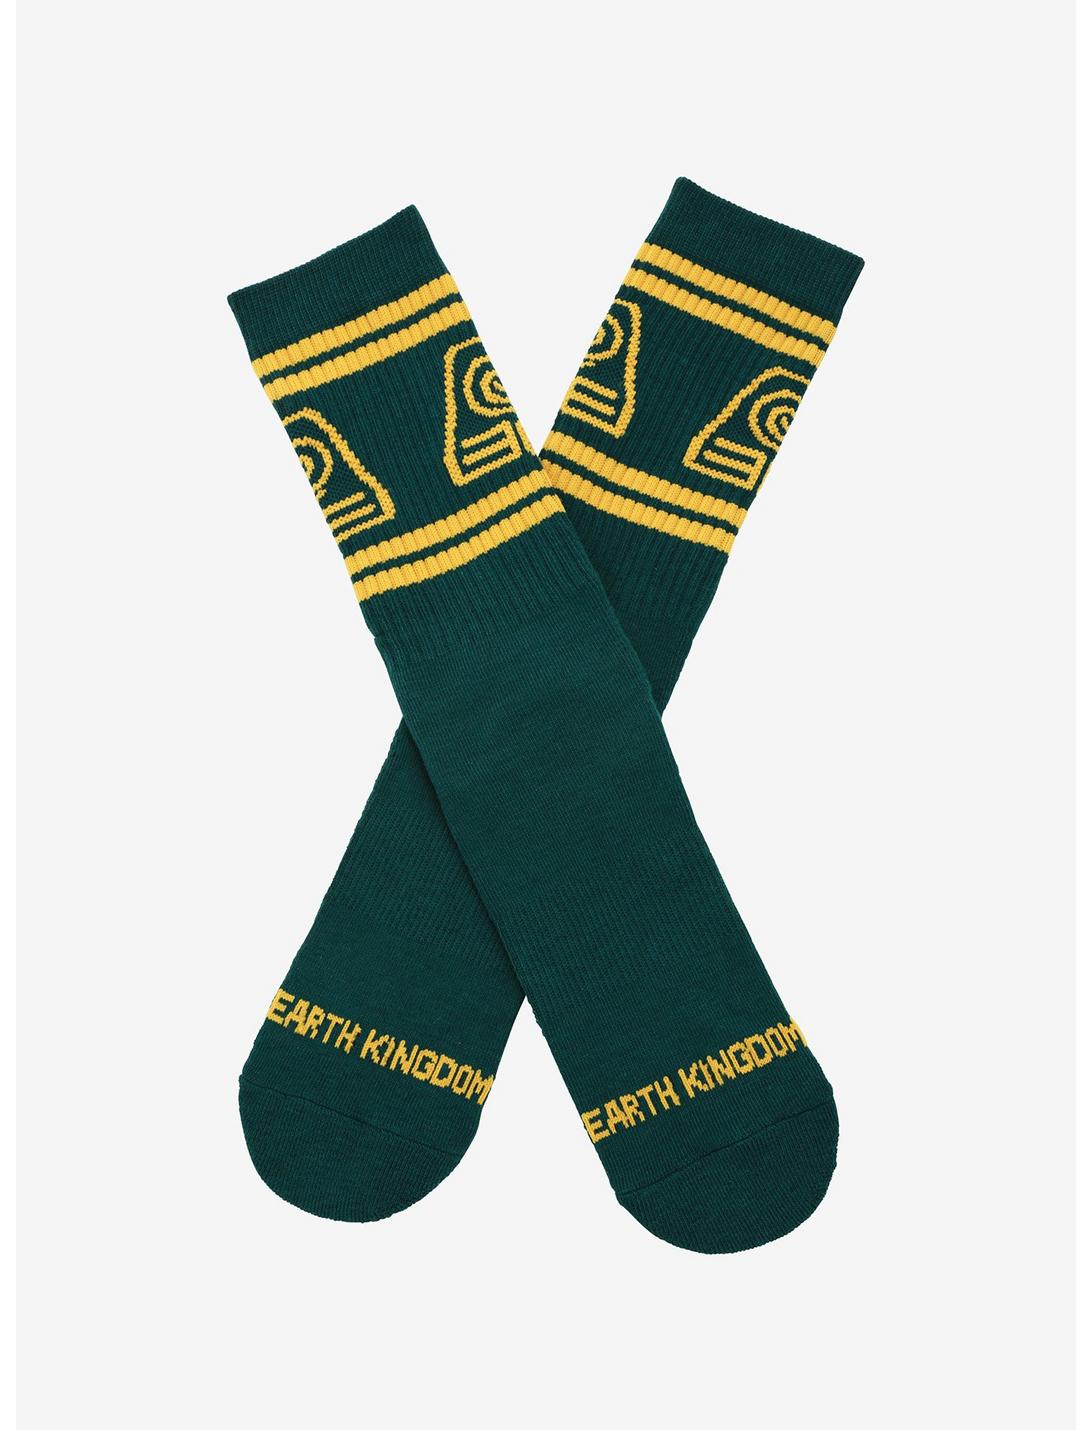 Avatar: The Last Airbender Earth Kingdom Crew Socks - BoxLunch Exclusive, , hi-res